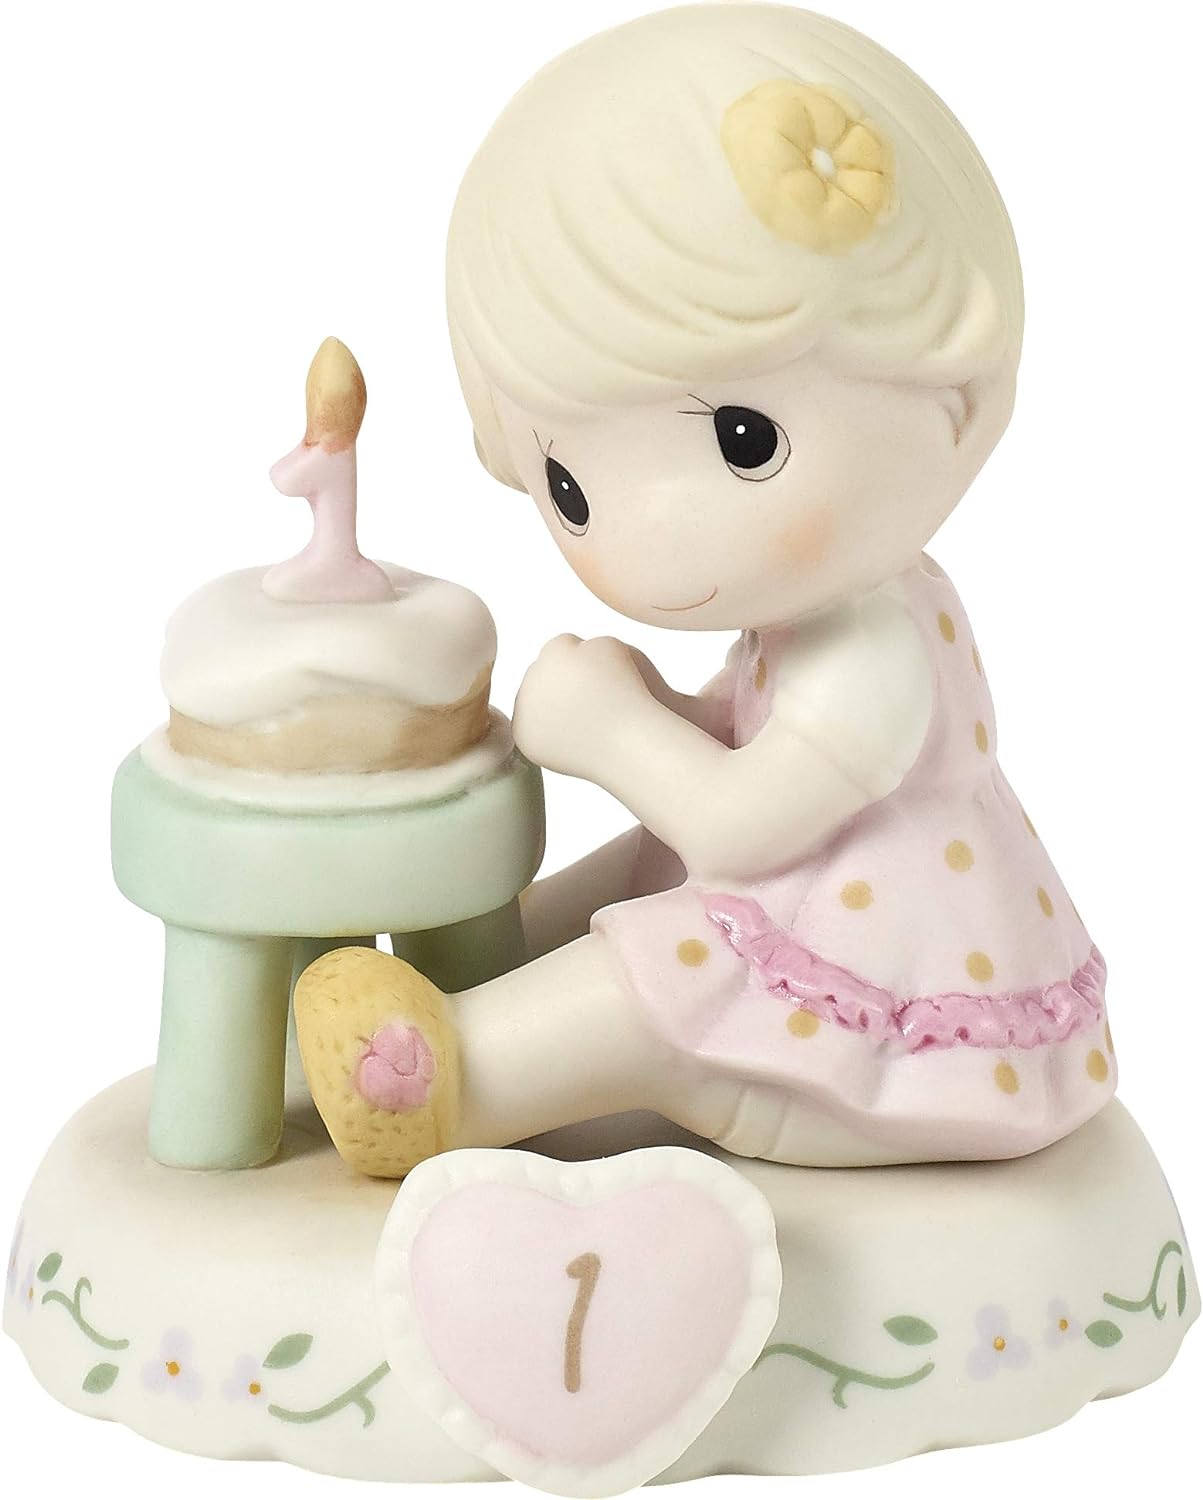 Precious Moments Age 1 Girl Birthday Gifts, Growing in Grace, Porcelain Figurine